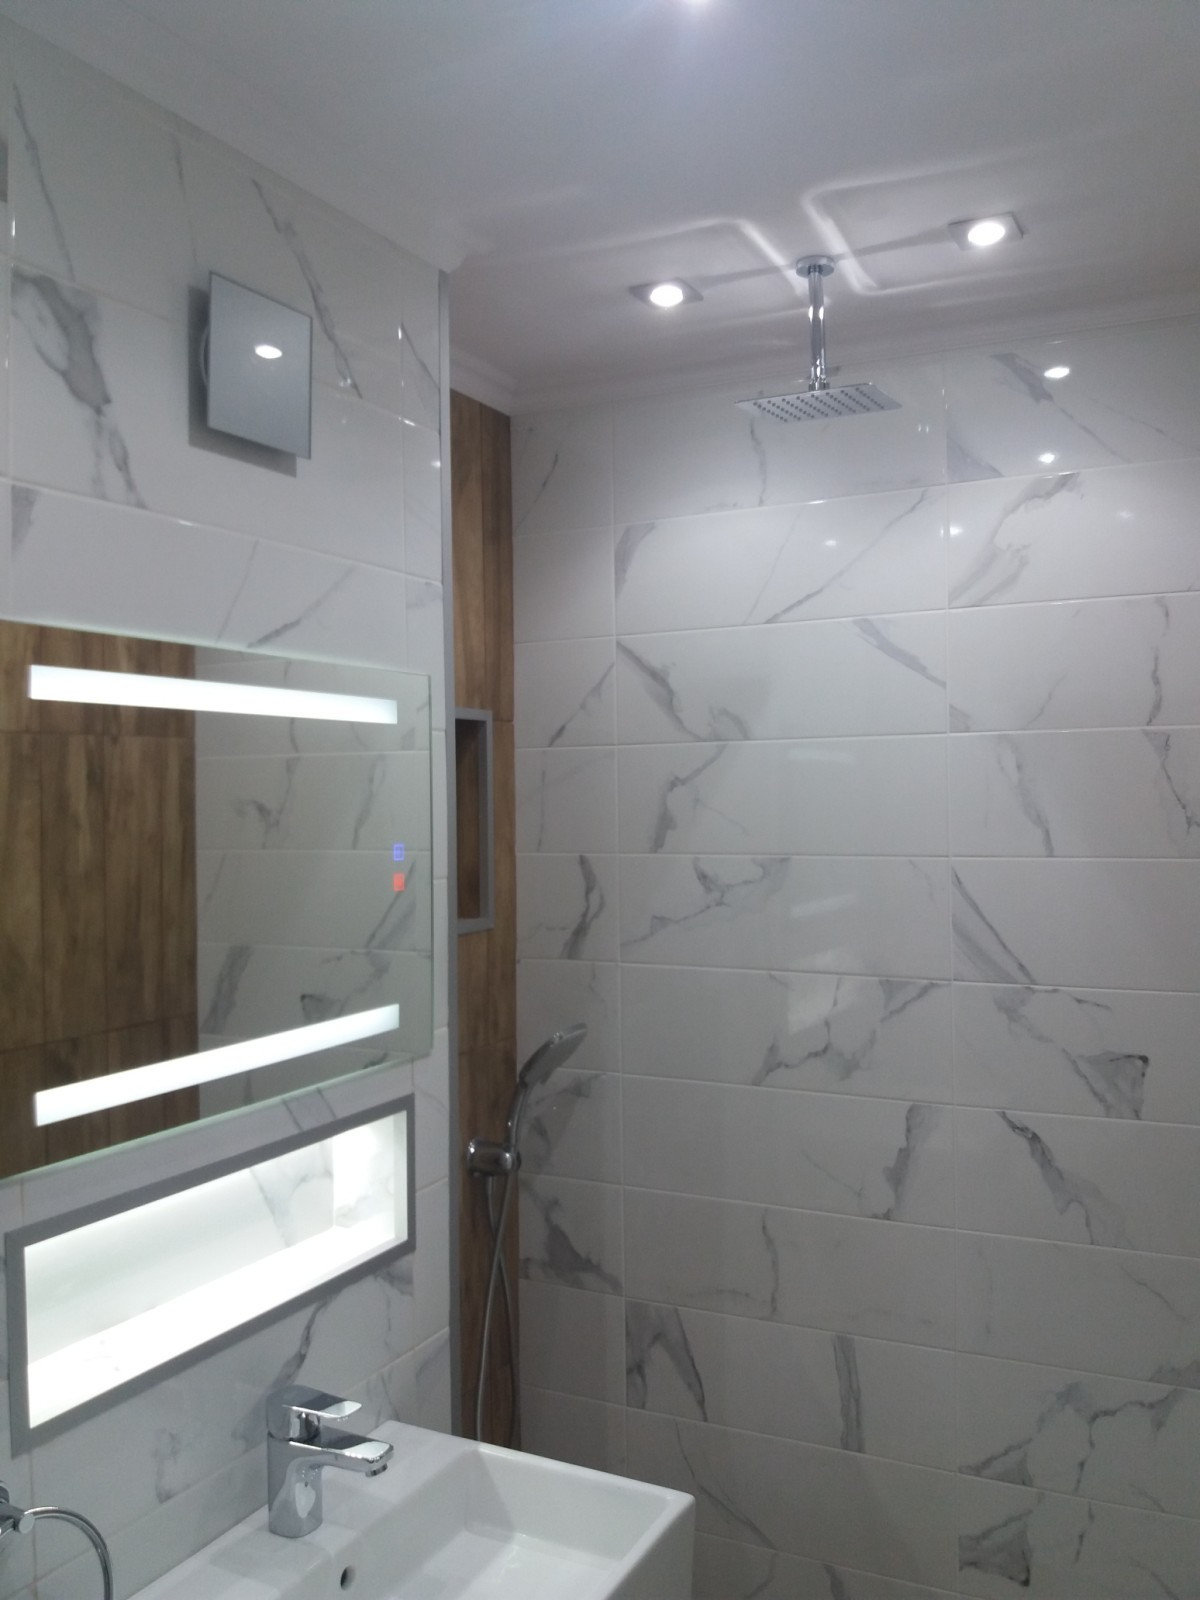 Bathroom Renovation completed - contemporary, marble, wood